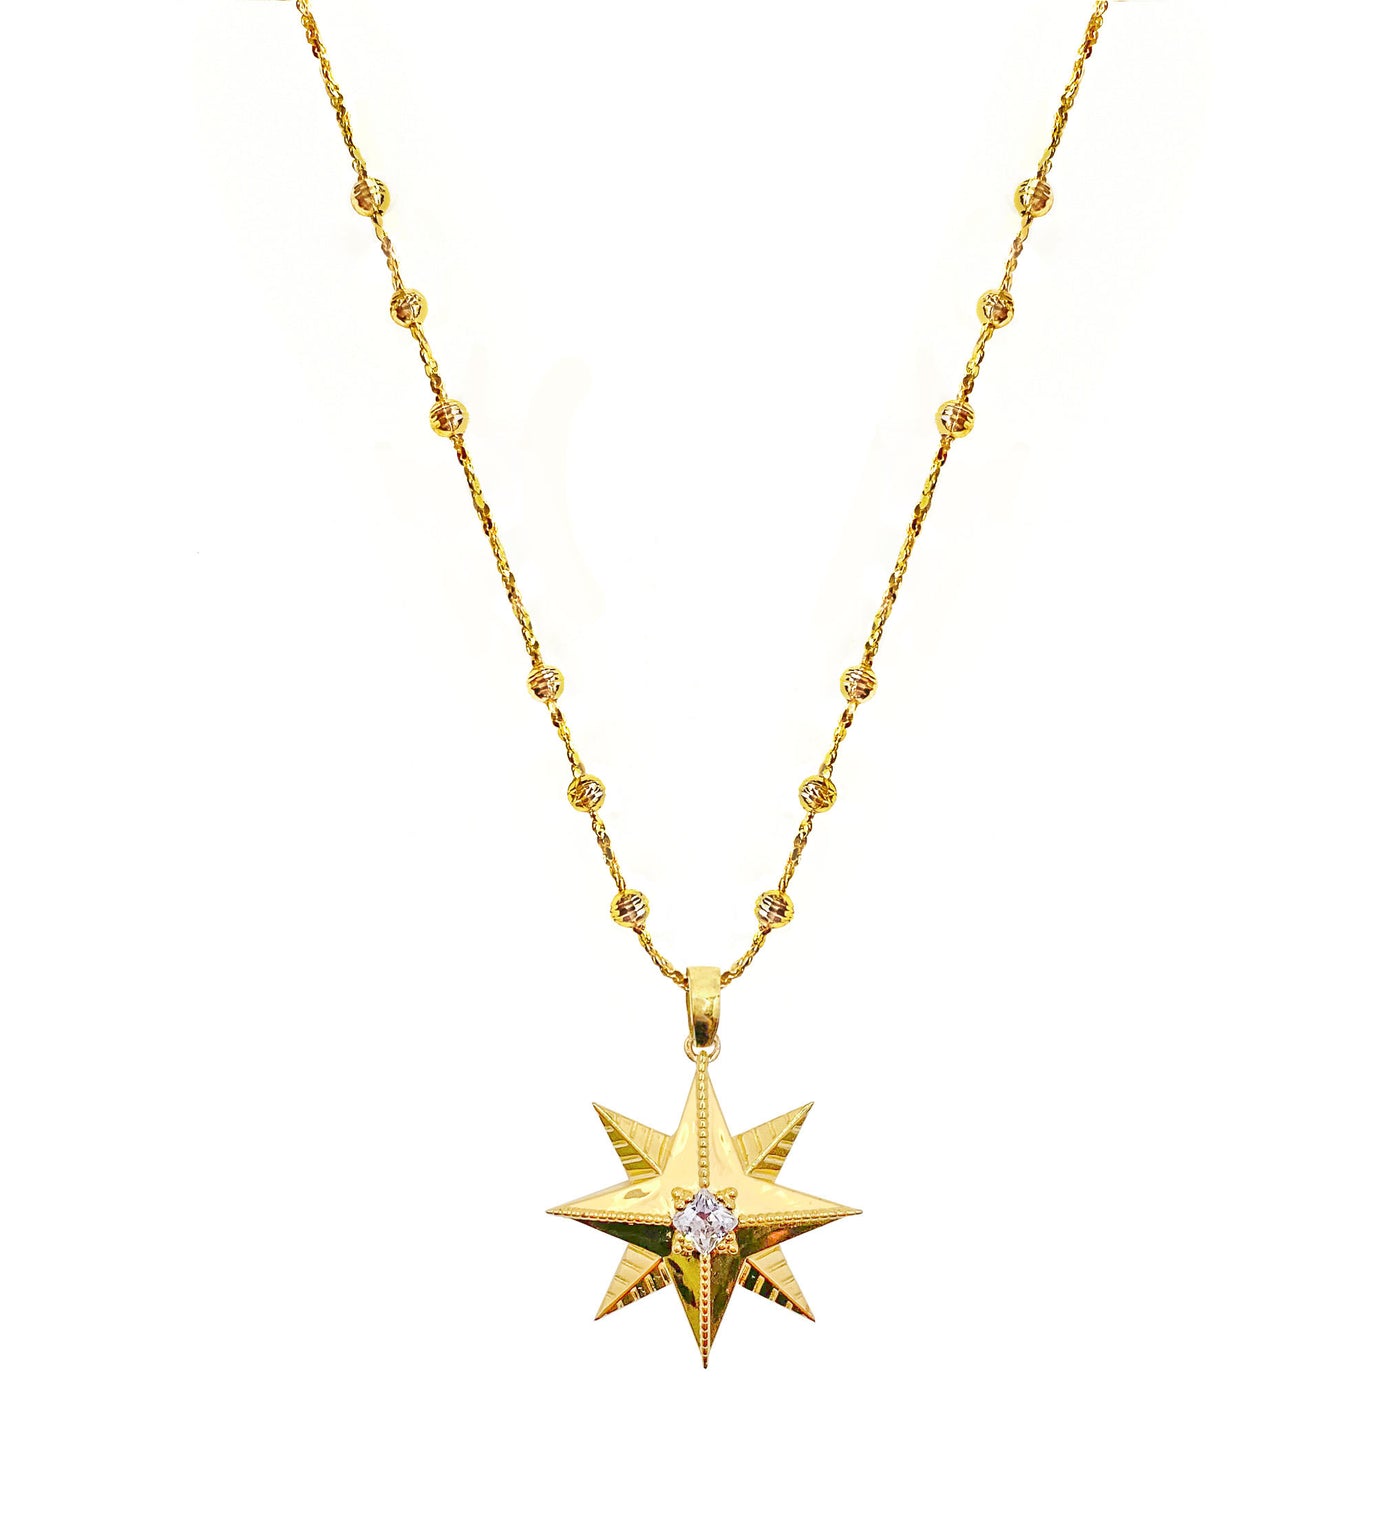 Gold plated sterling silver 3D star pendant necklace with CZ crystal on bobble chain